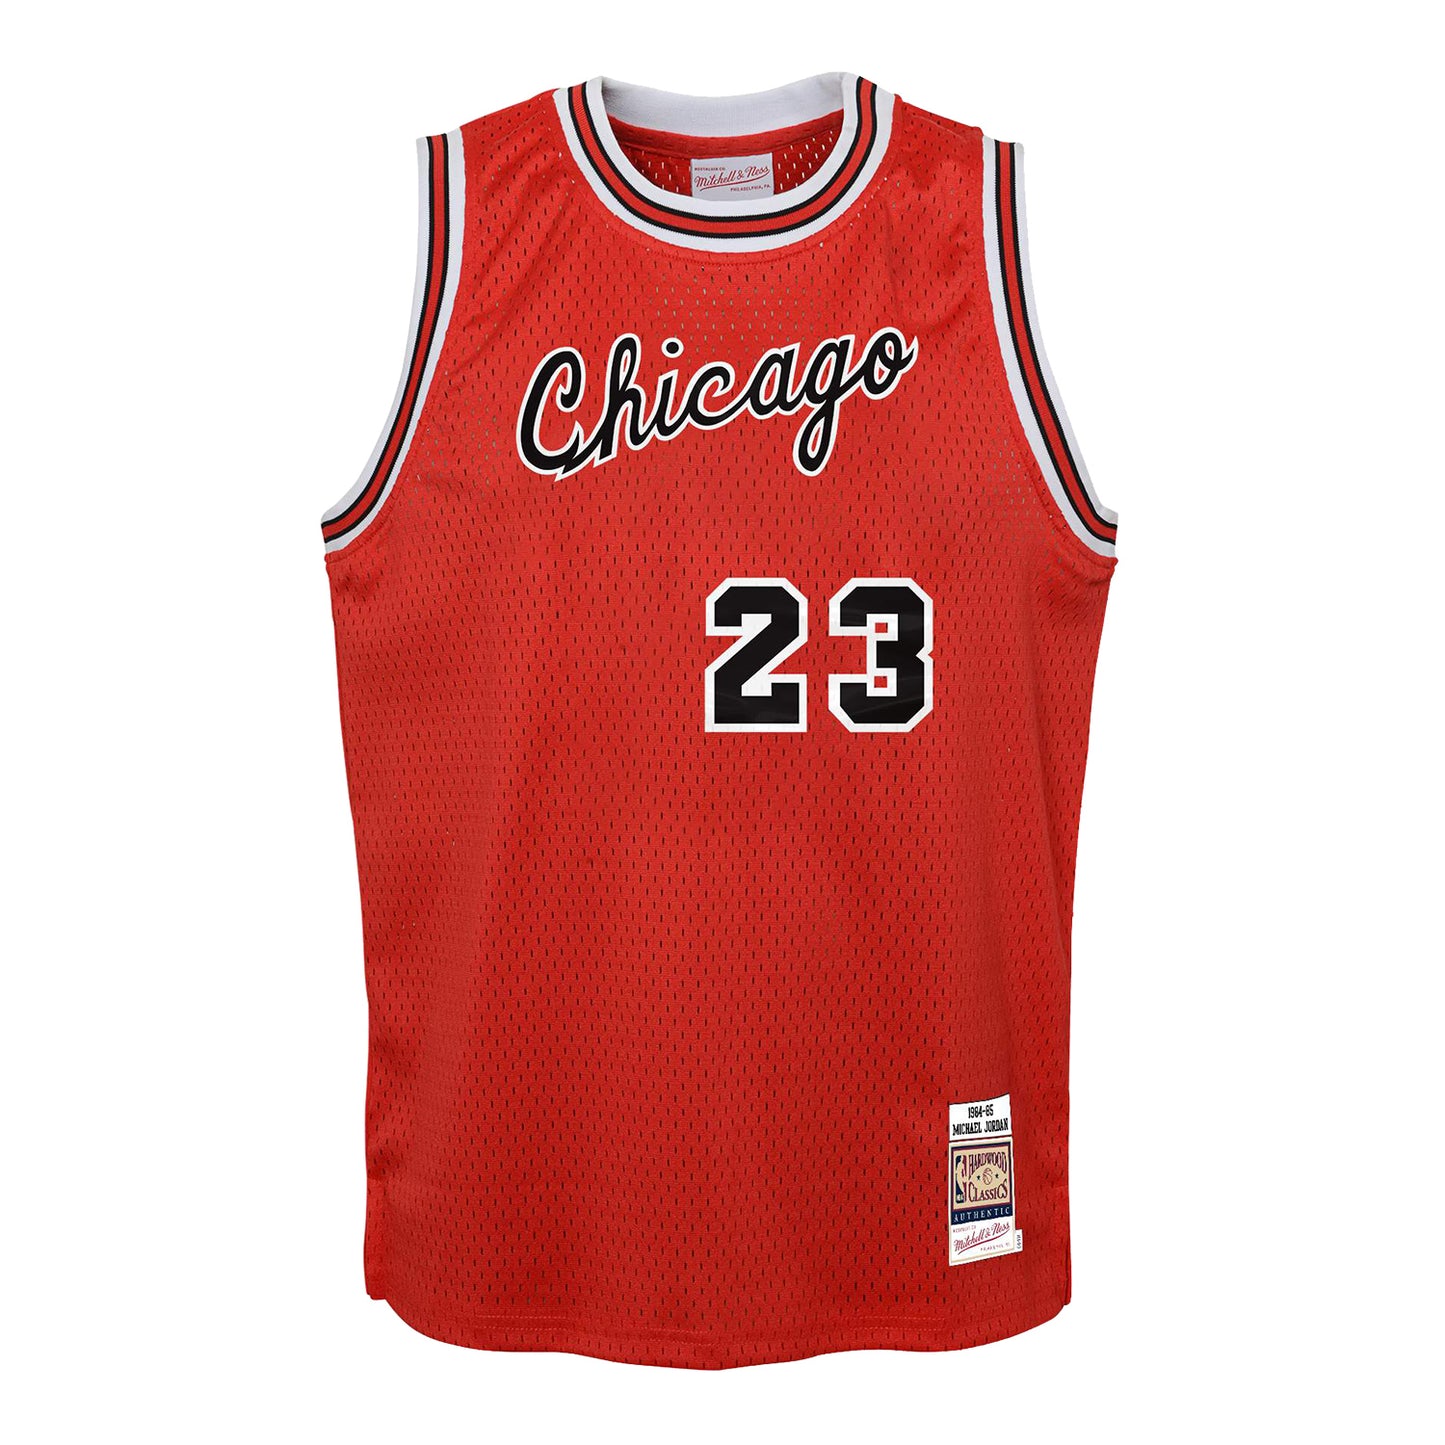 Youth Chicago Bulls Authentic Mitchell & Ness Michael Jordan 1984-85 Jersey in red - front view